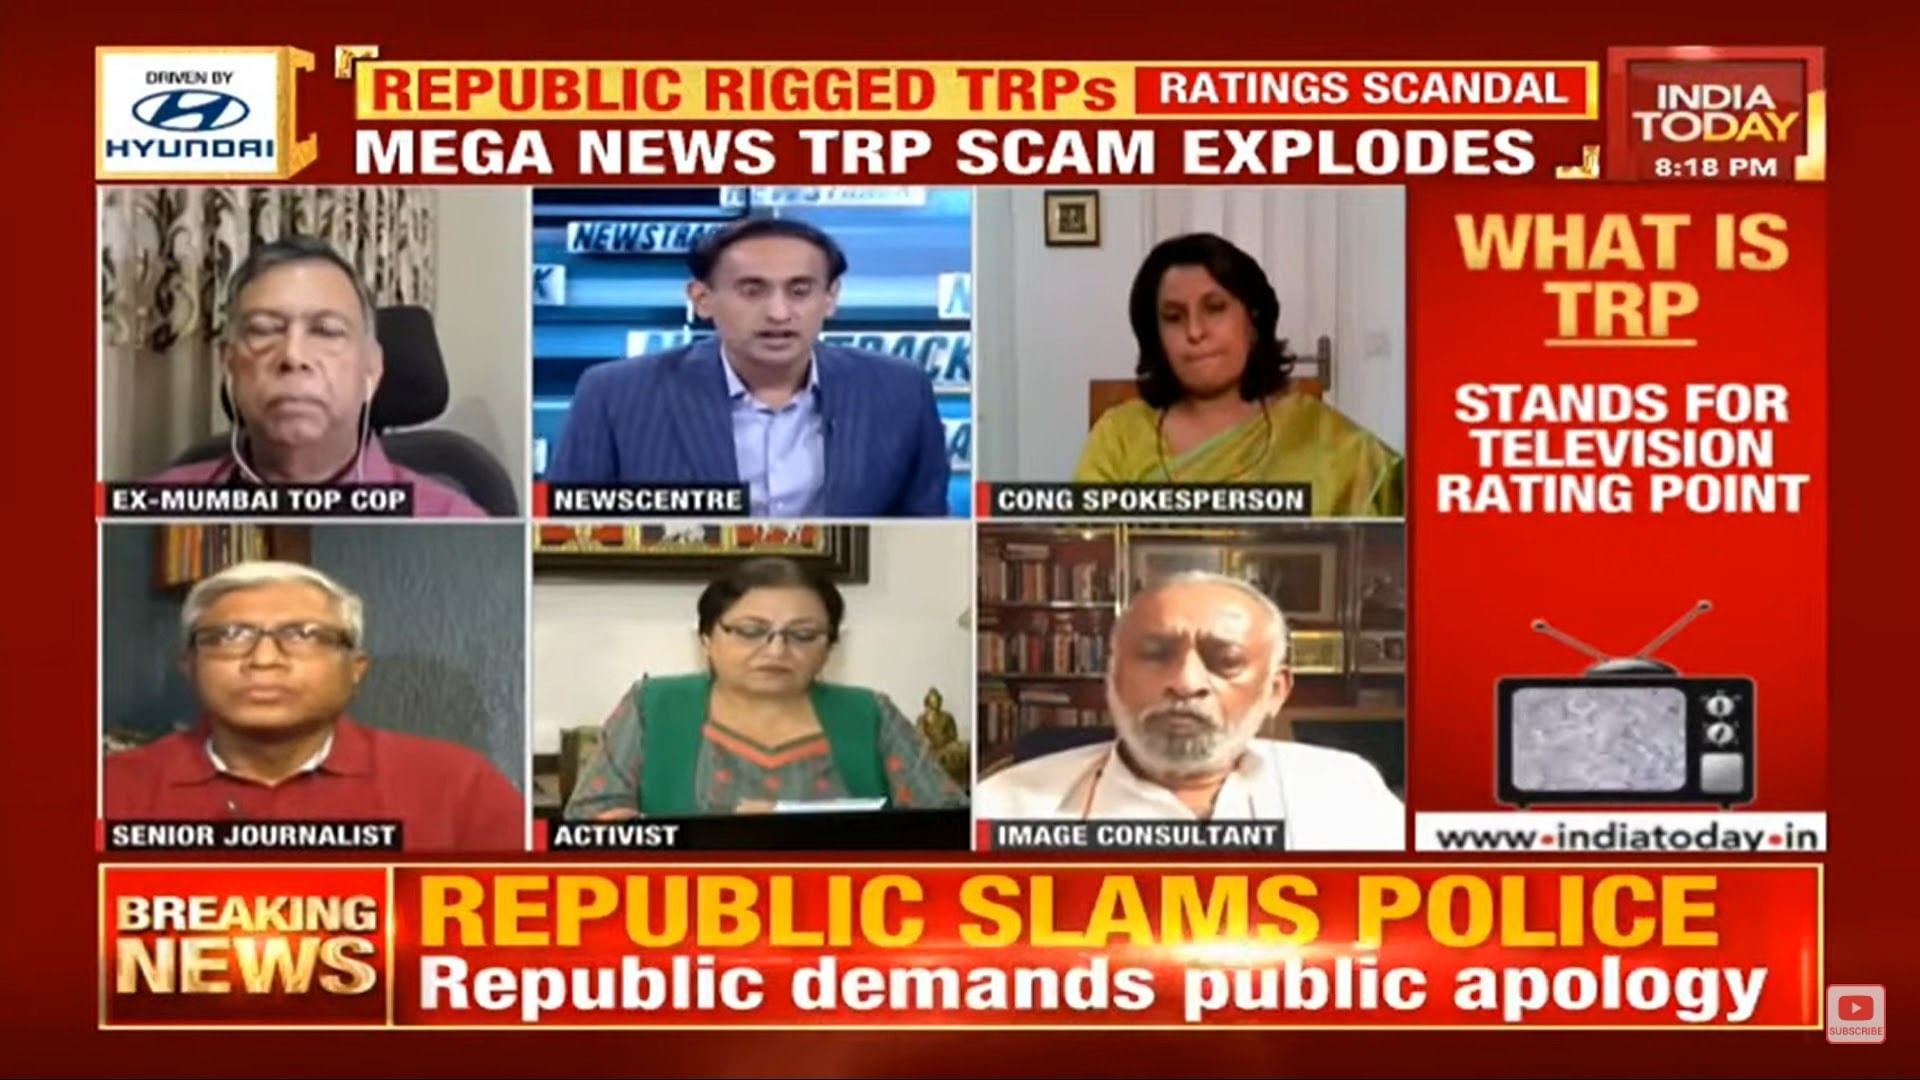 Republic vs the Rest — Aaj Tak calls out 'TRP chor', NDTV on madaari, ABP  says people betrayed